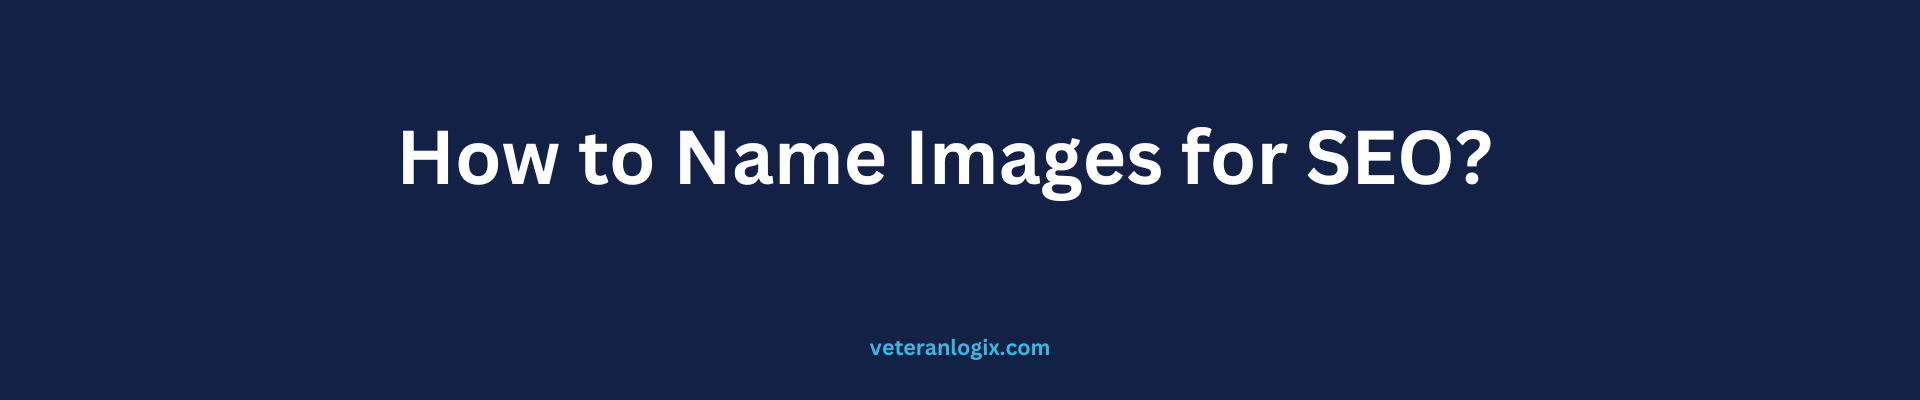 How to name images for seo